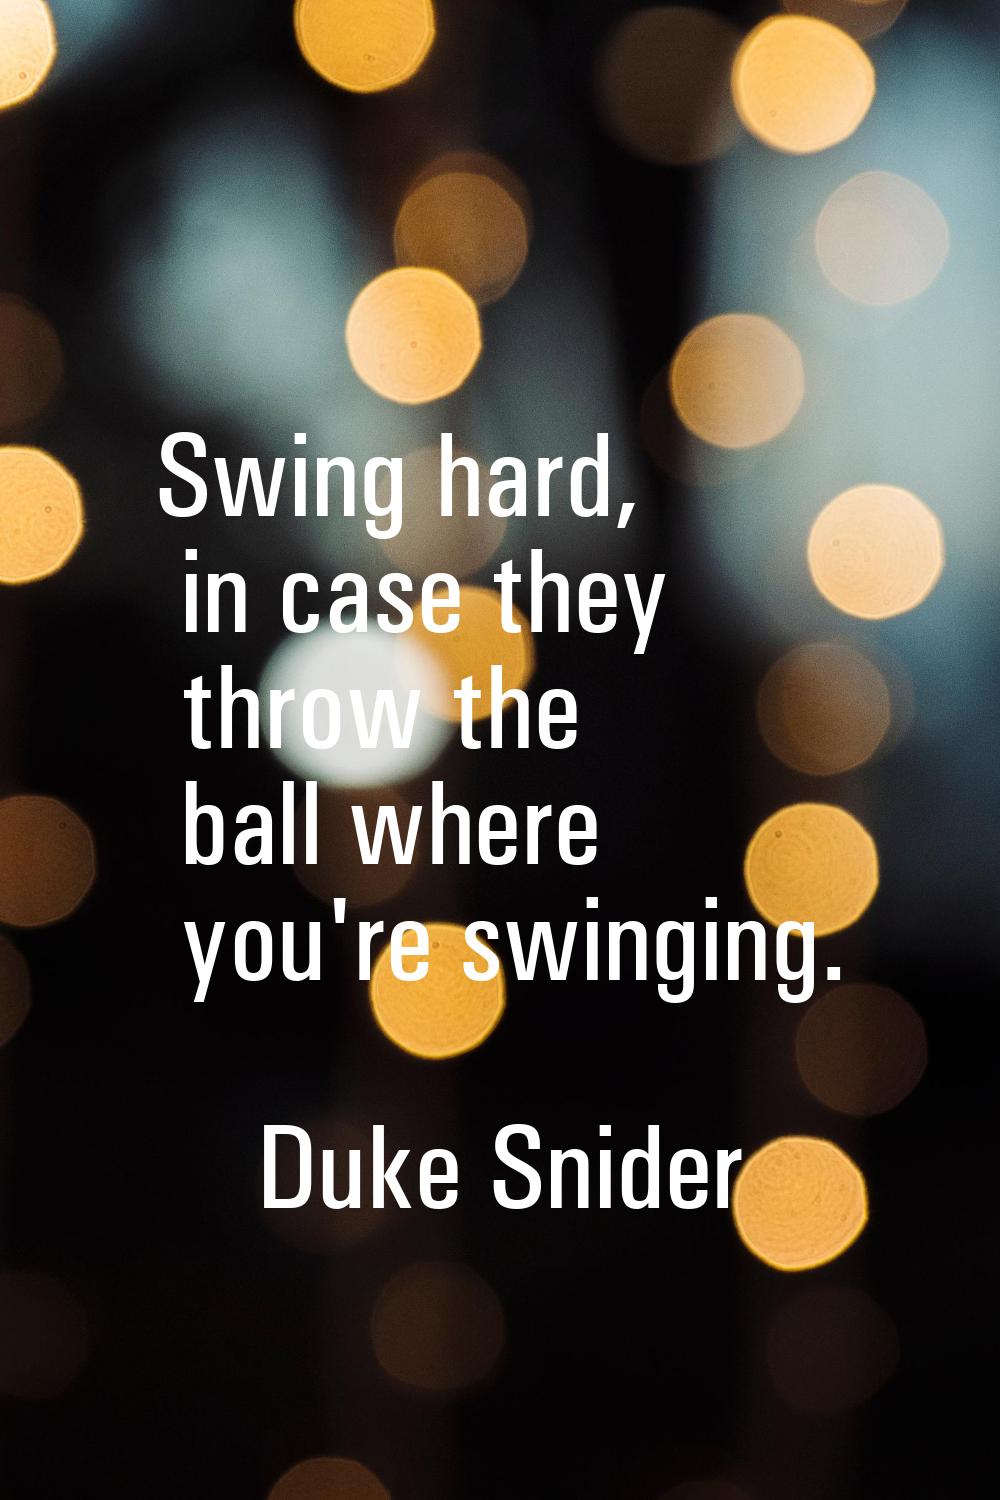 Swing hard, in case they throw the ball where you're swinging.